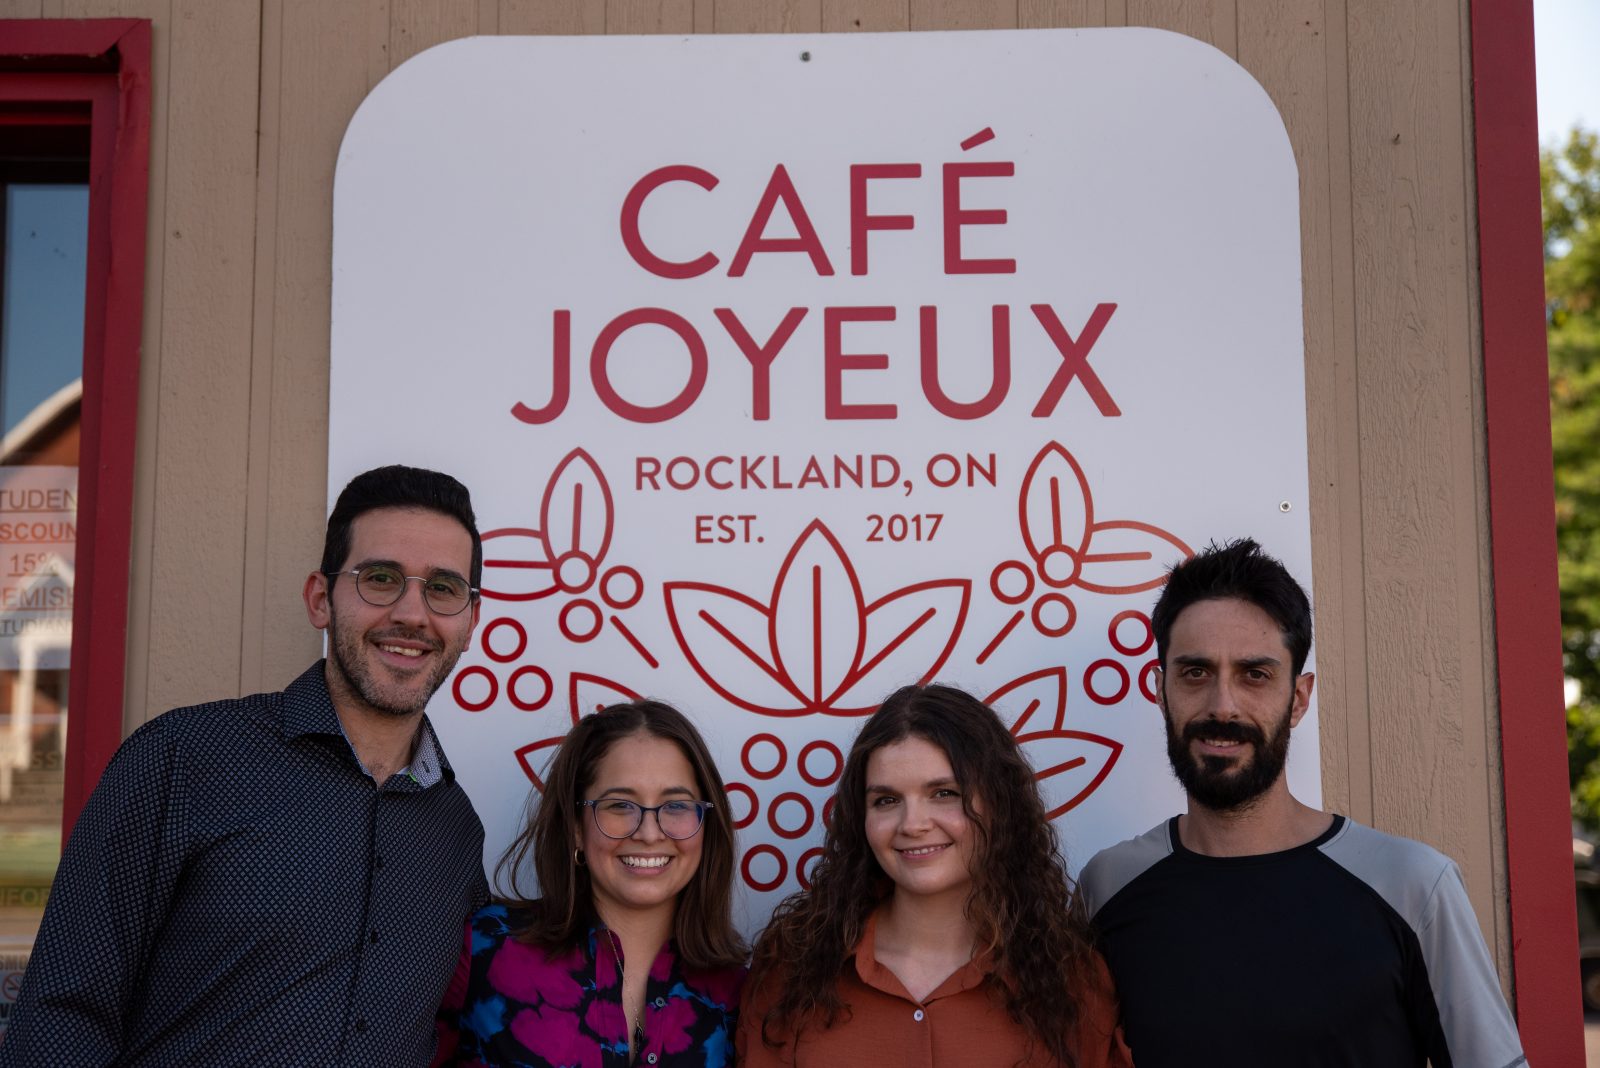 Keeping the joy in Rockland’s coffee shop